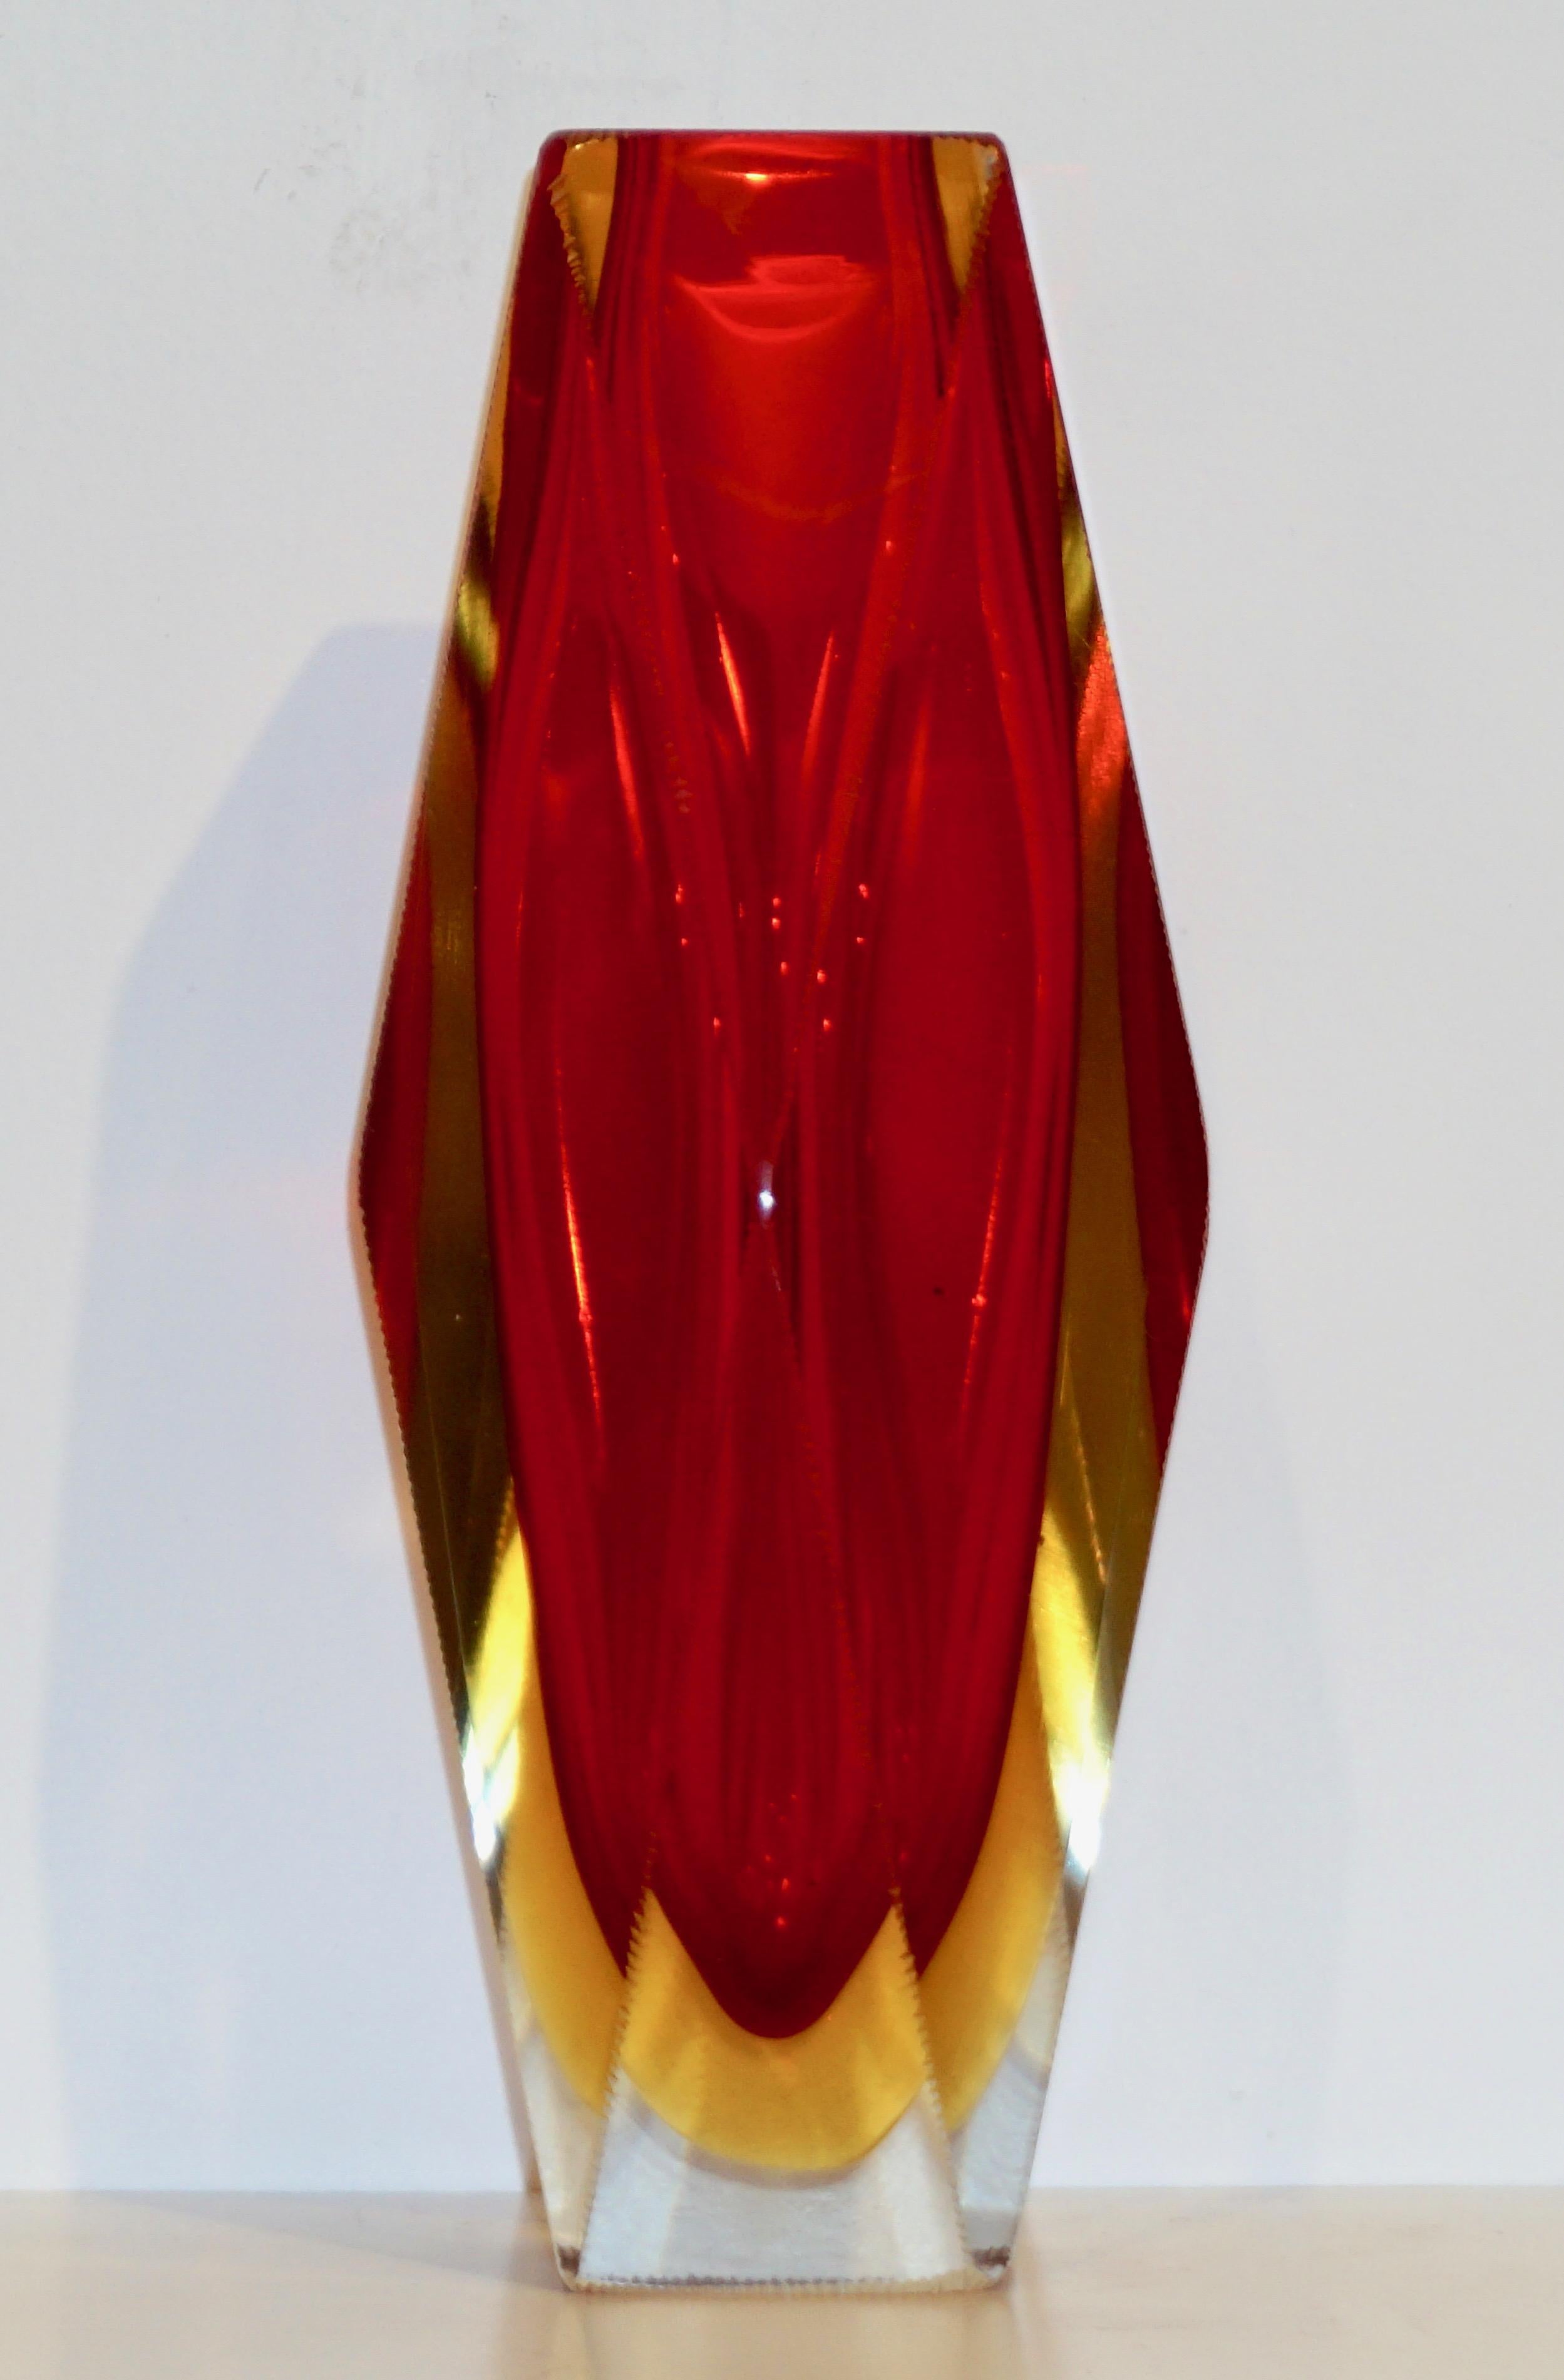 Italian Mid-Century modern polyhedron Murano glass vase in vibrant colors. This organic design with geometric multi-side diamond cut shape by Seguso is typical of Flavio Poli's work, the linear design enhanced by the triple Sommerso technique: the